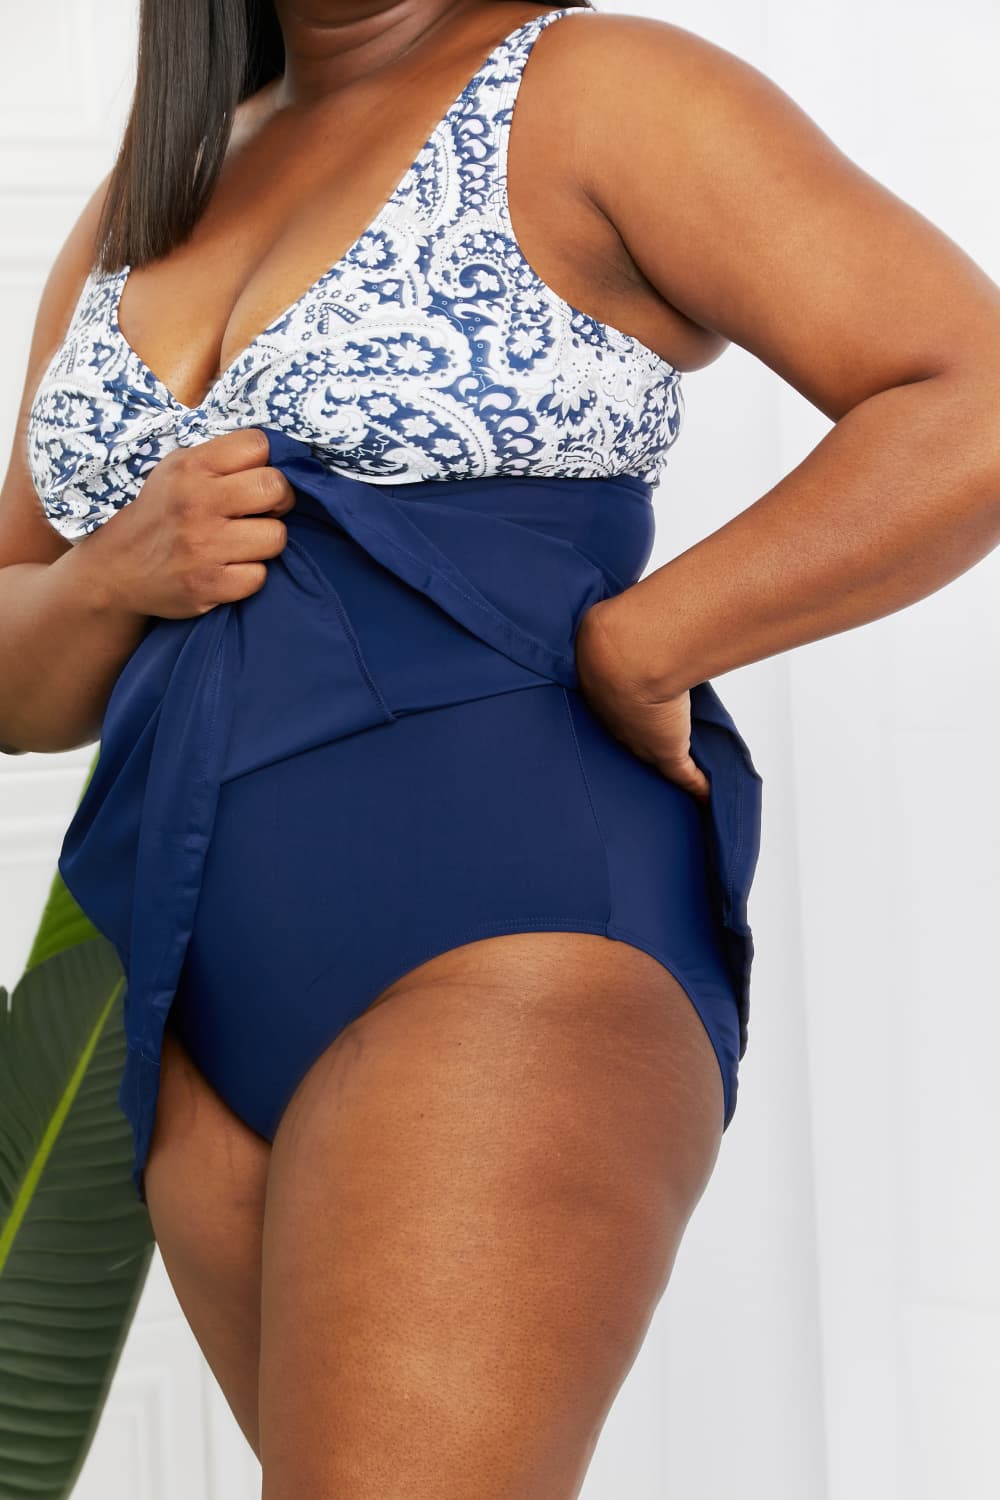 Marina West Swim Full Size Sail With Me V-Neck Swim Dress in Paisley Navy  Southern Soul Collectives 